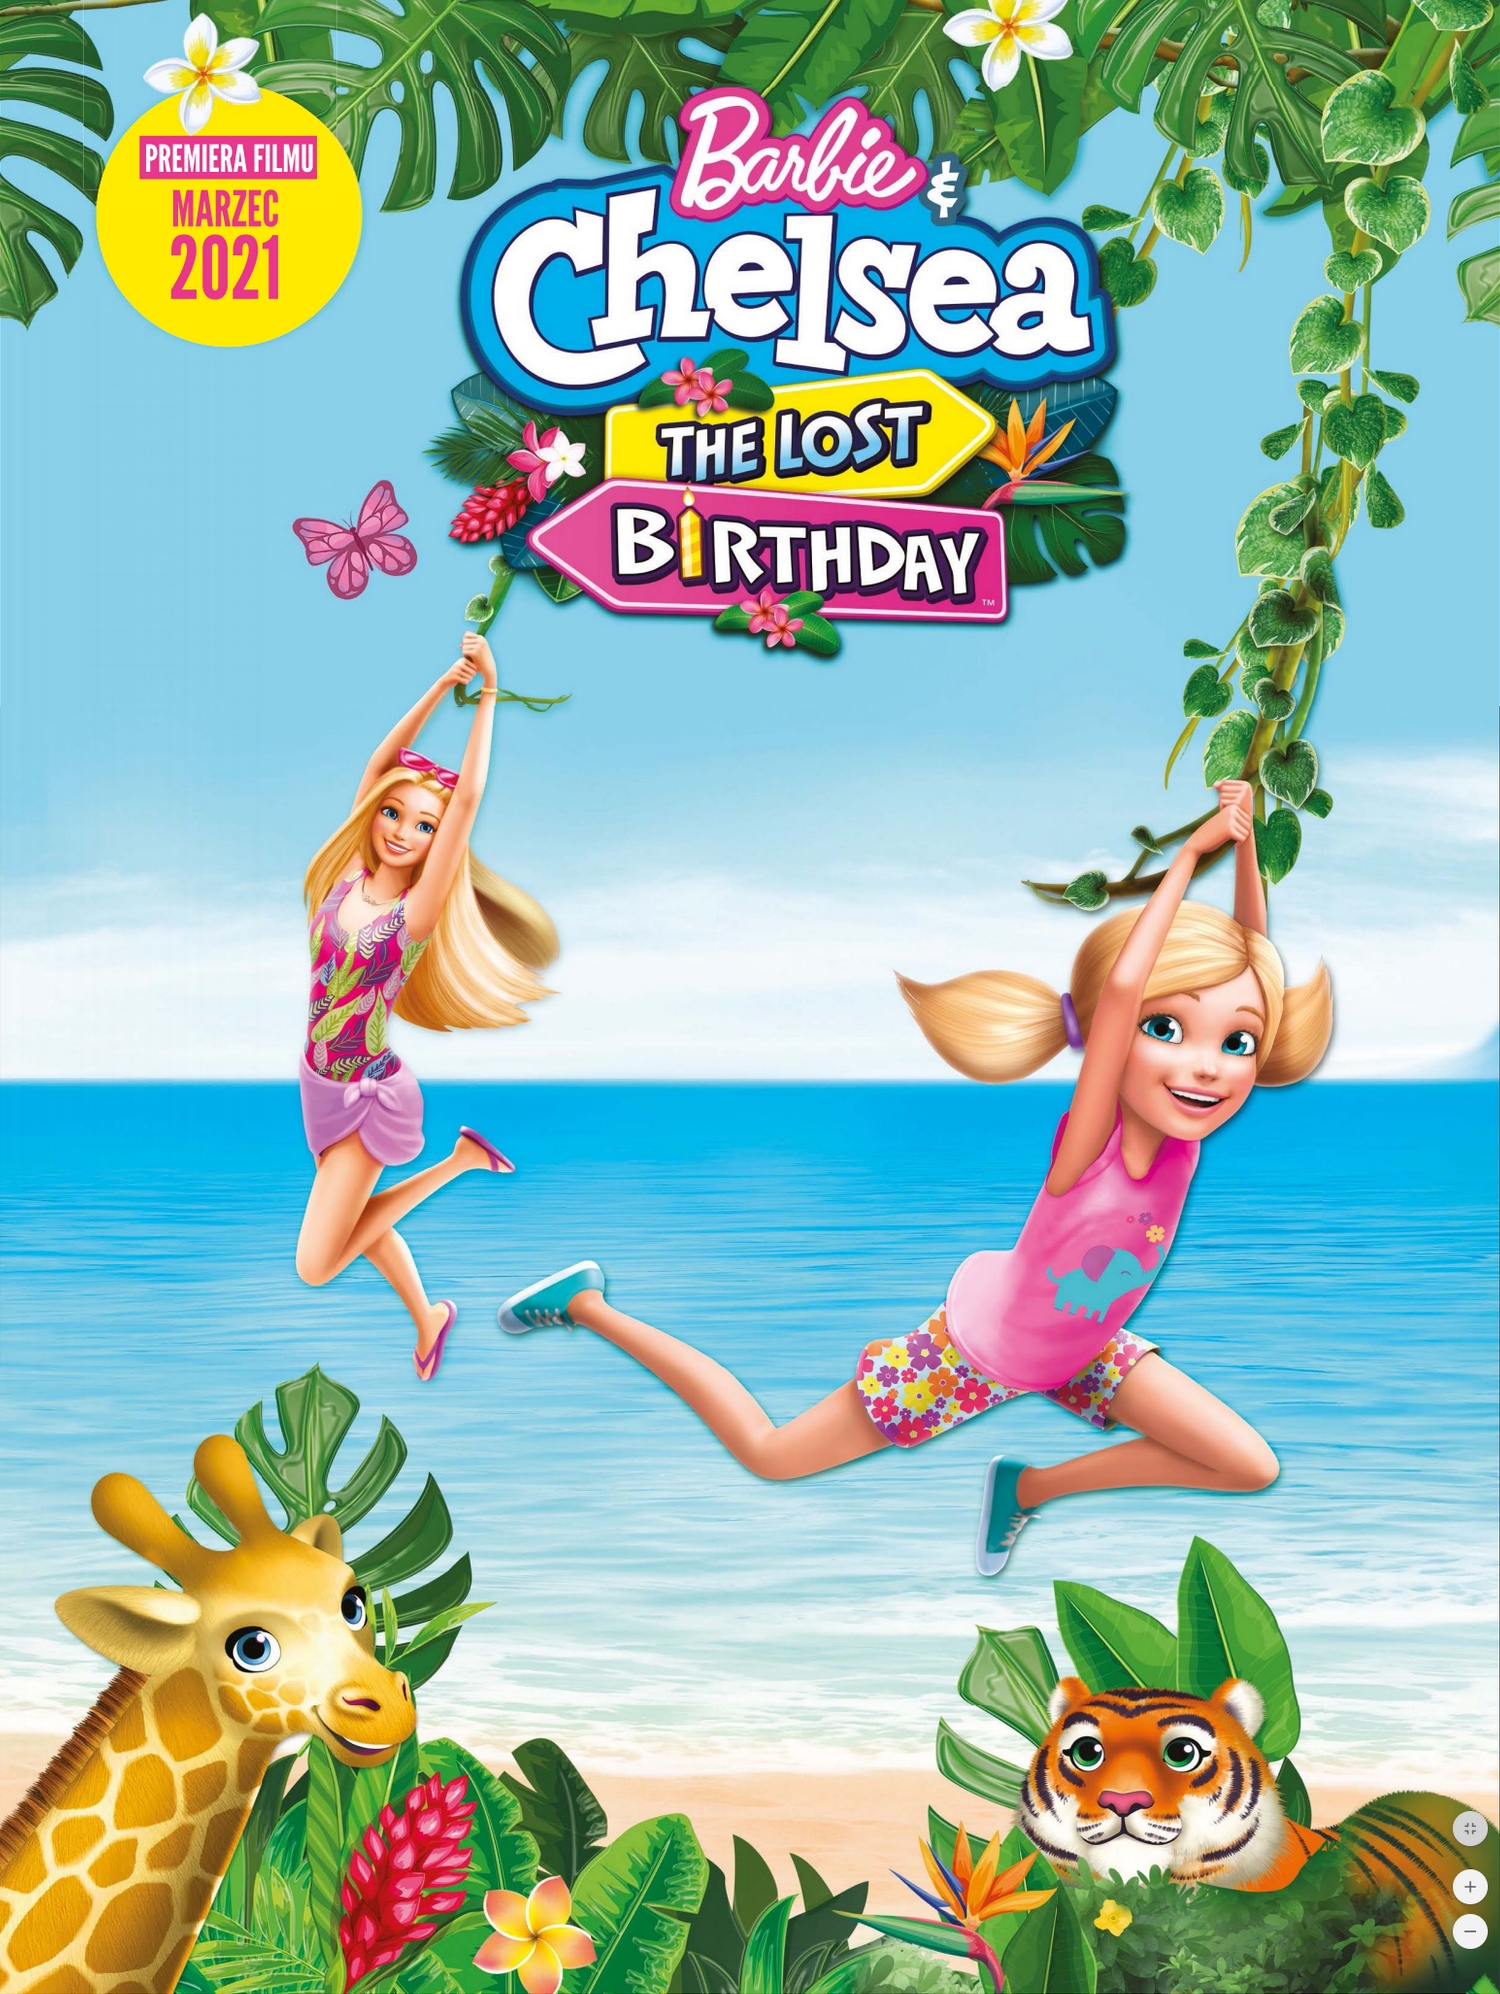 Barbie & Chelsea: The Lost Birthday NEW BARBIE MOVIE WILL BE RELEASED IN MARCH 2021!!! Movies Photo